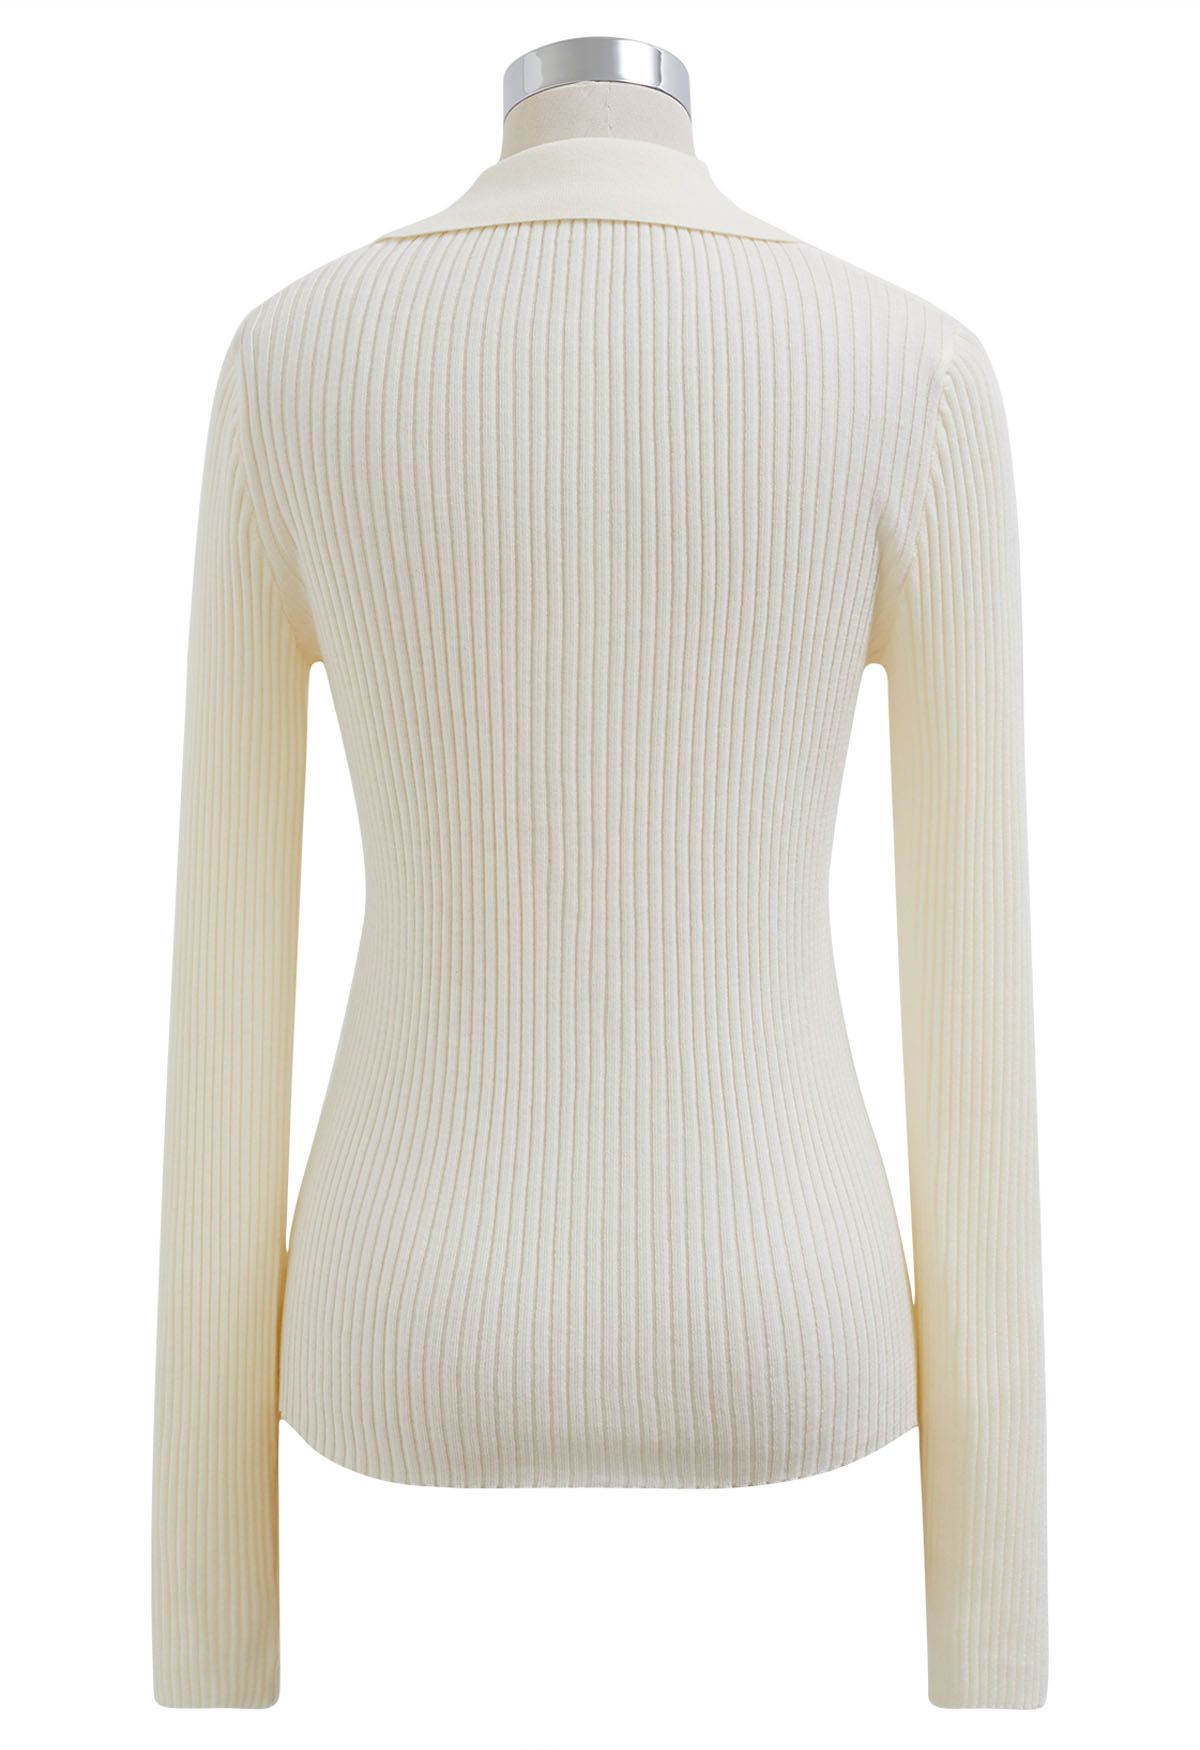 V-Neck Collared Fitted Knit Top in Cream